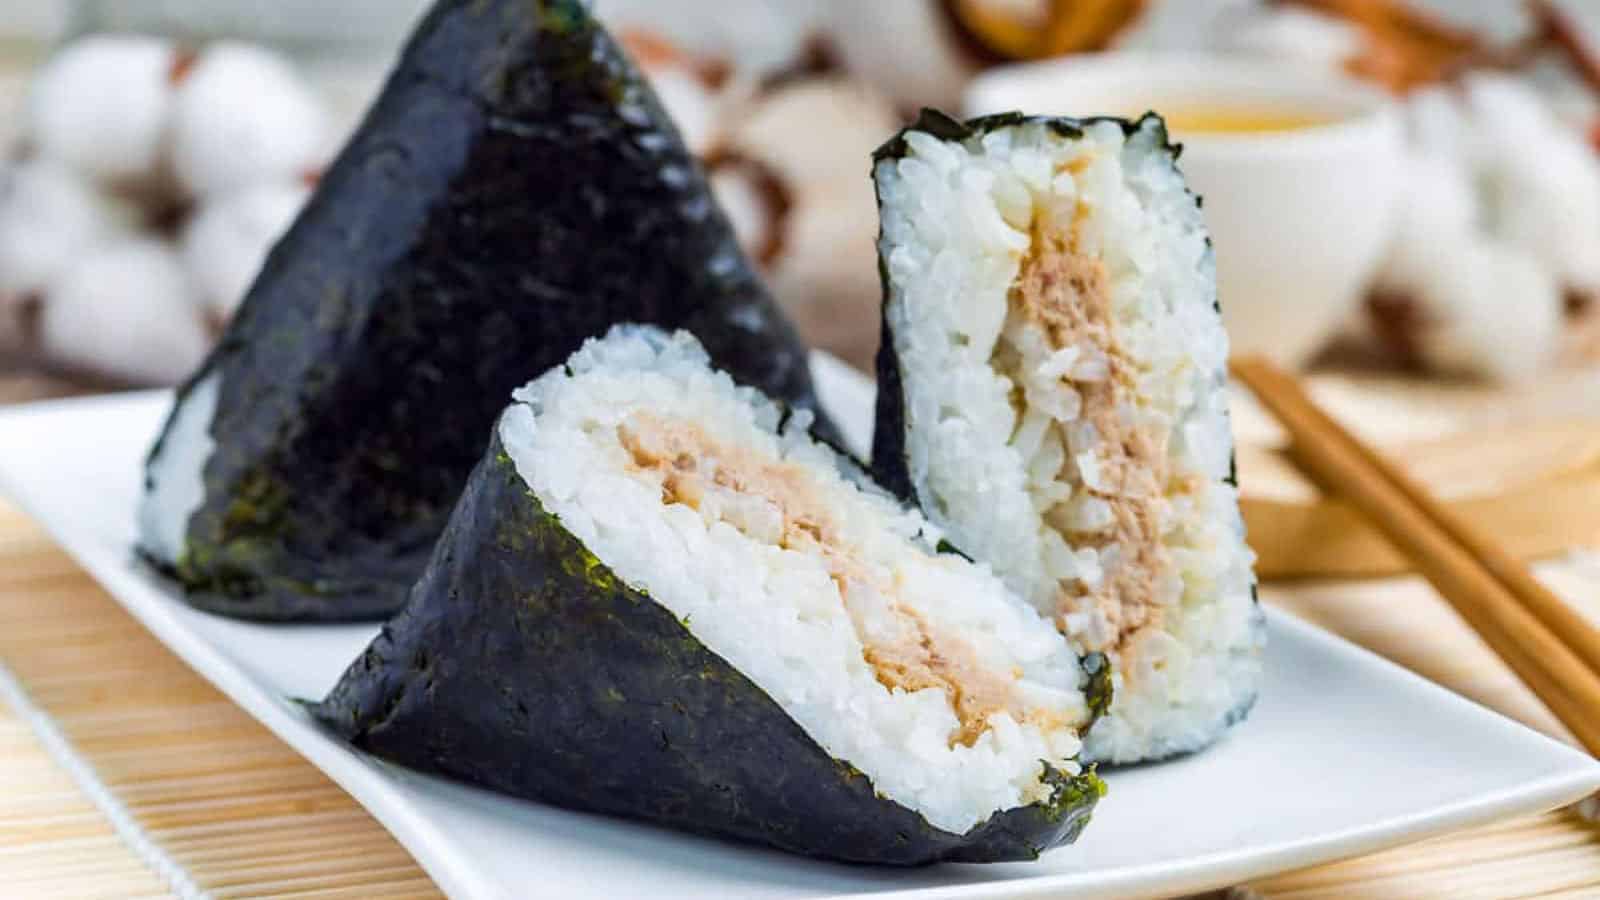 Two pieces of onigiri on a plate with chopsticks.